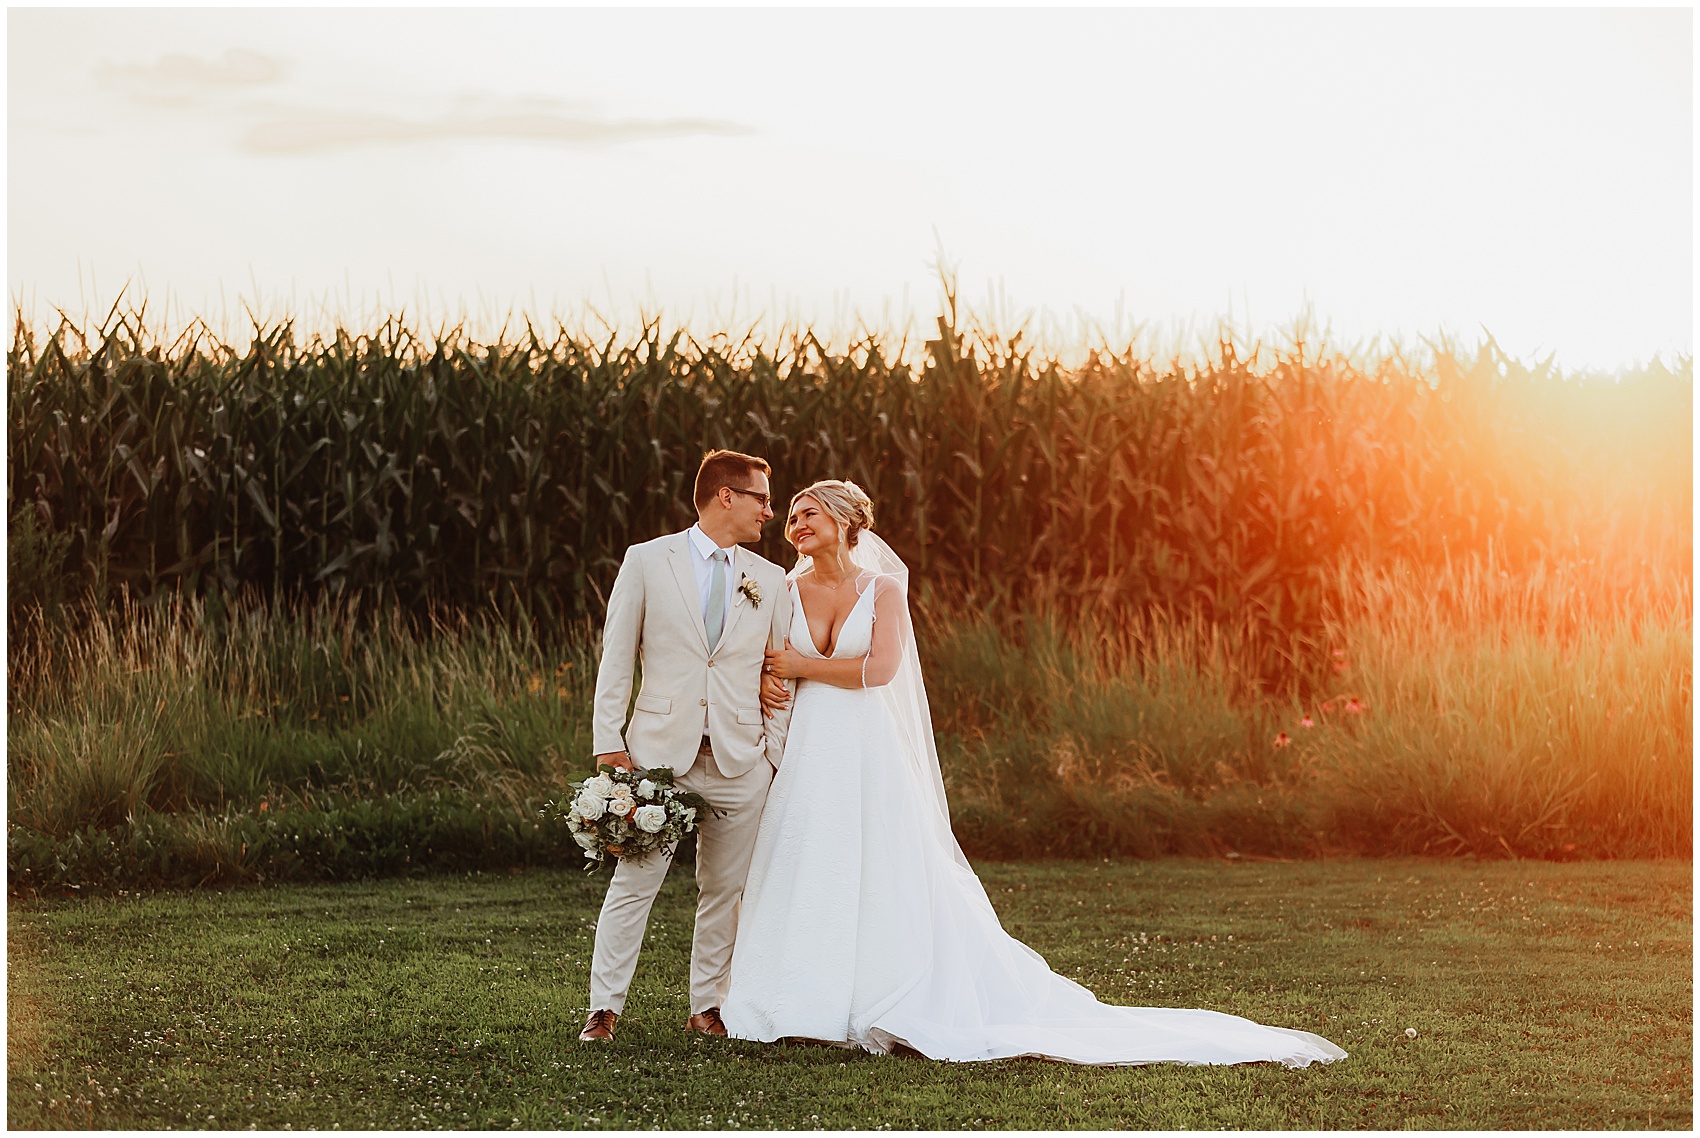 A bride in a long white silk dress holds onto the arm of her groom in a tan suit at sunset by a cornfield